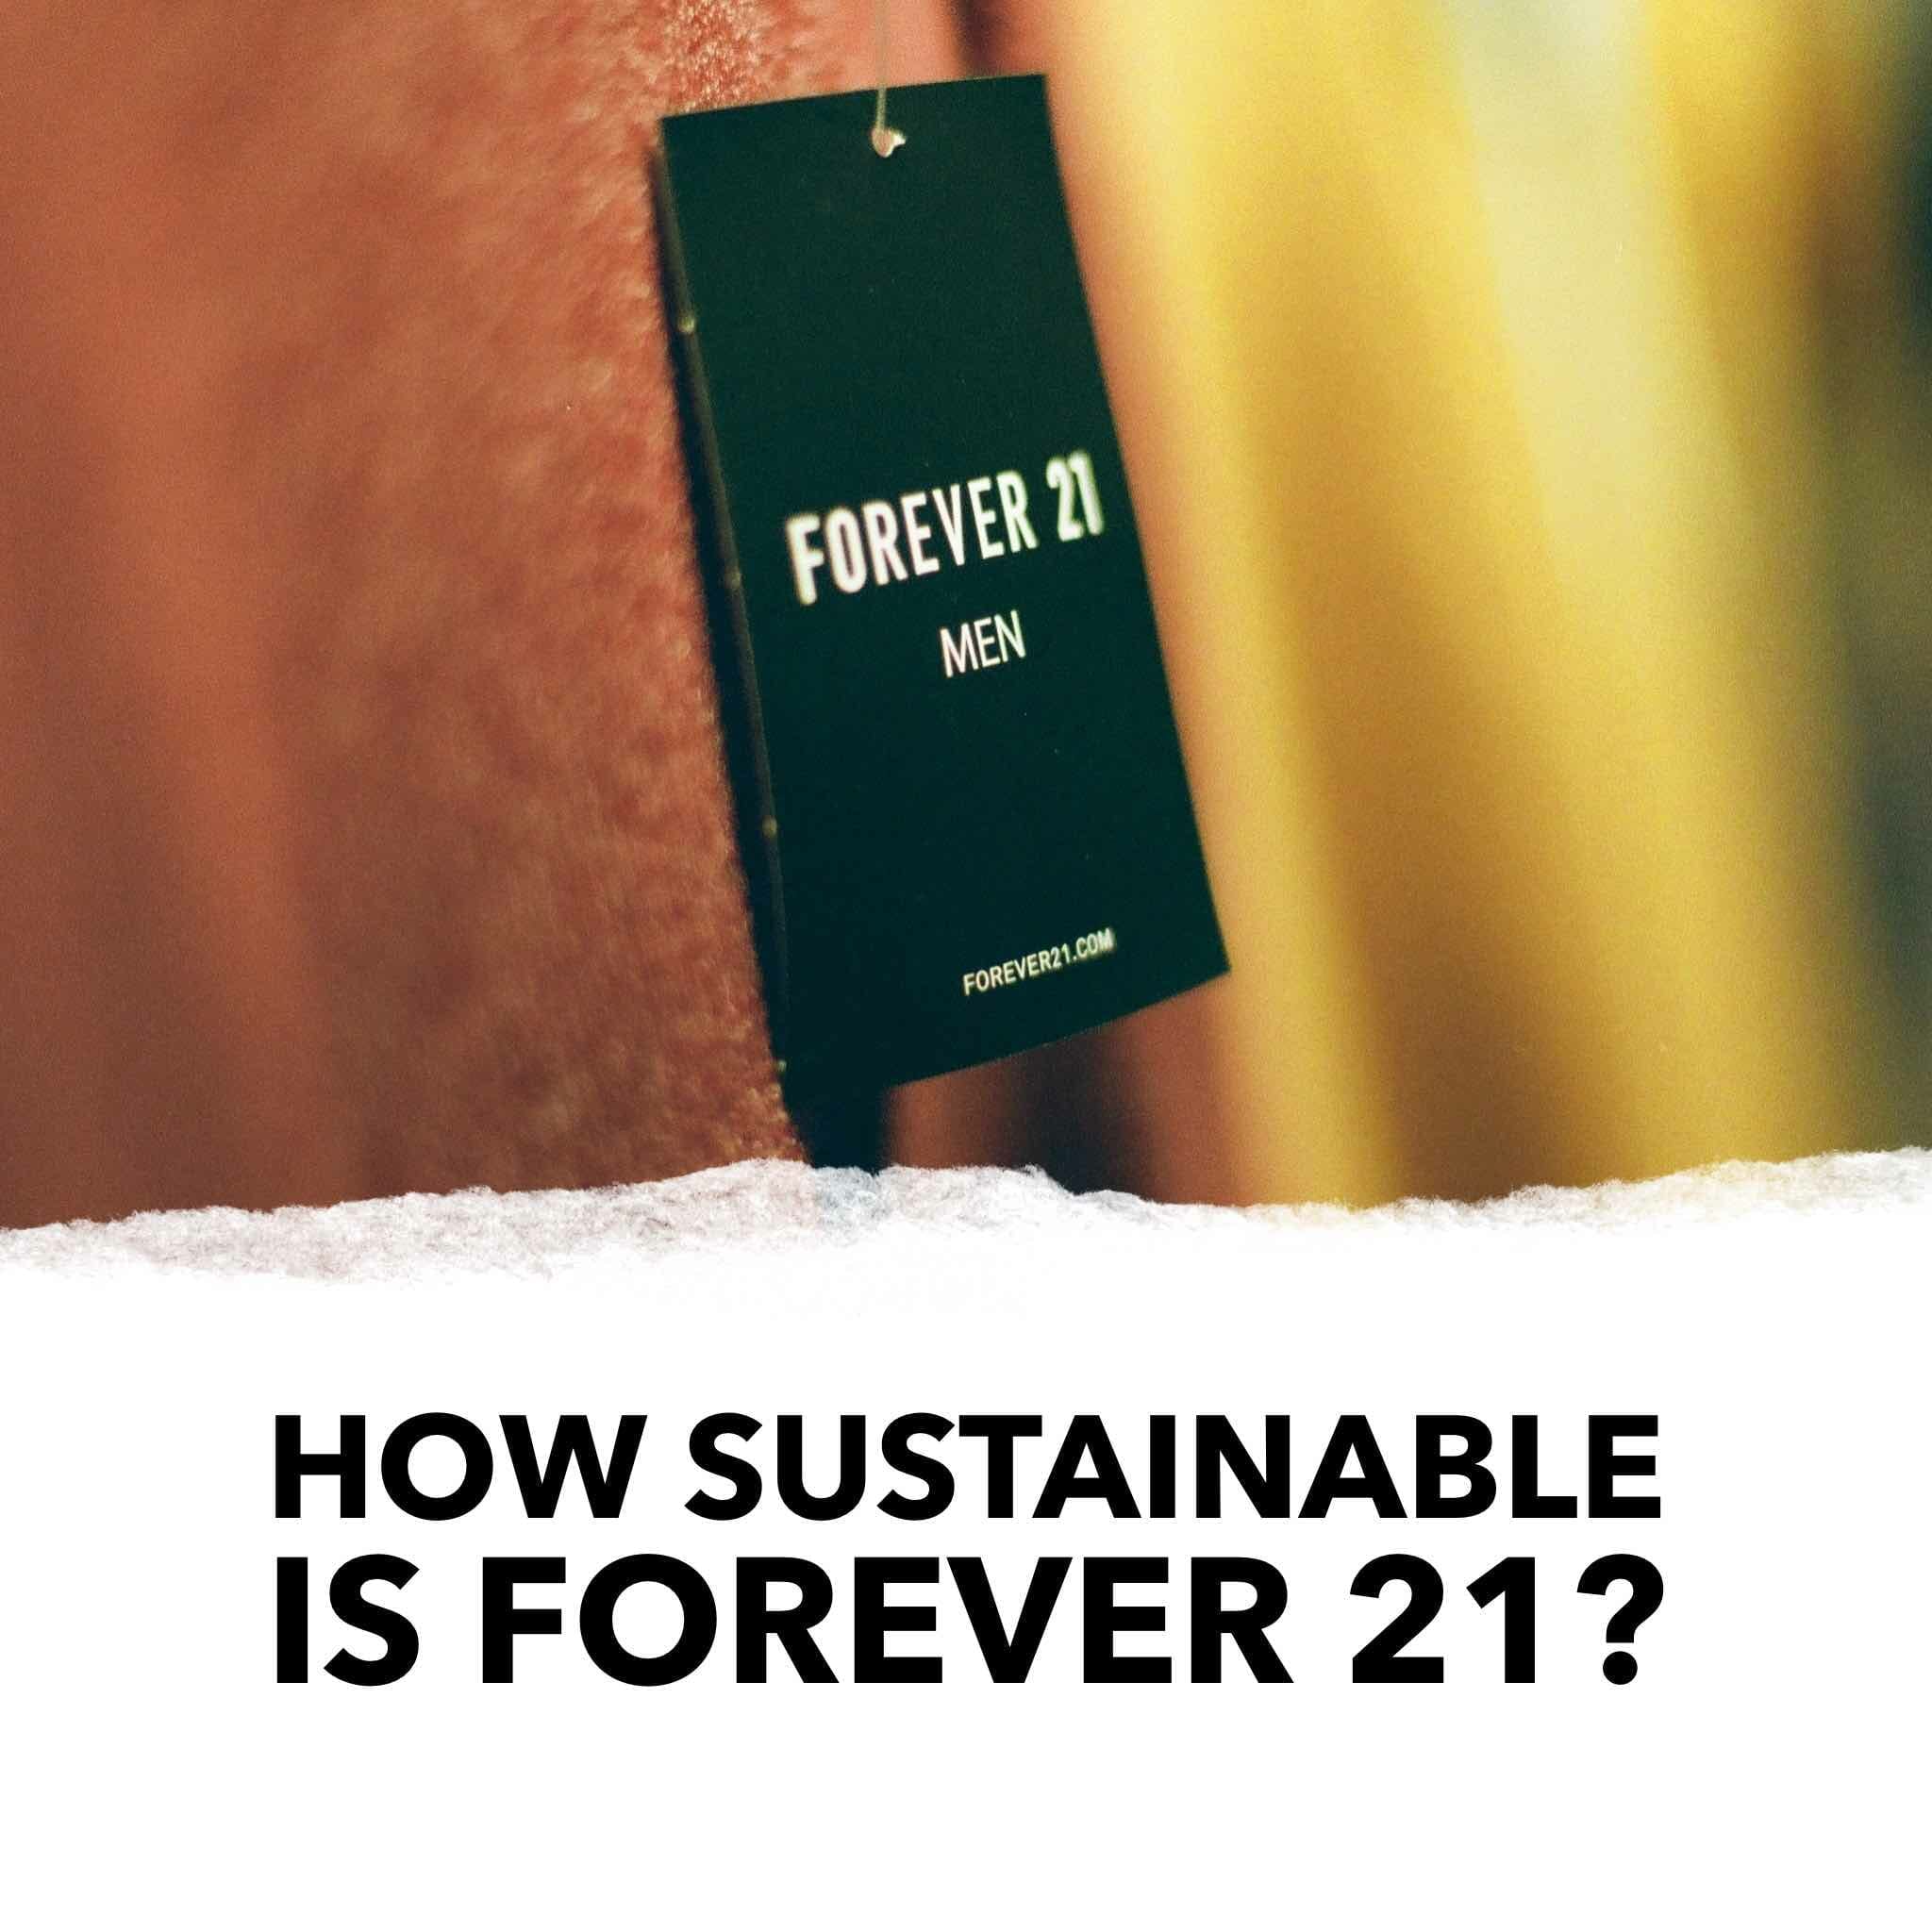 is forever 21 fast fashion? how ethical is forever 21?